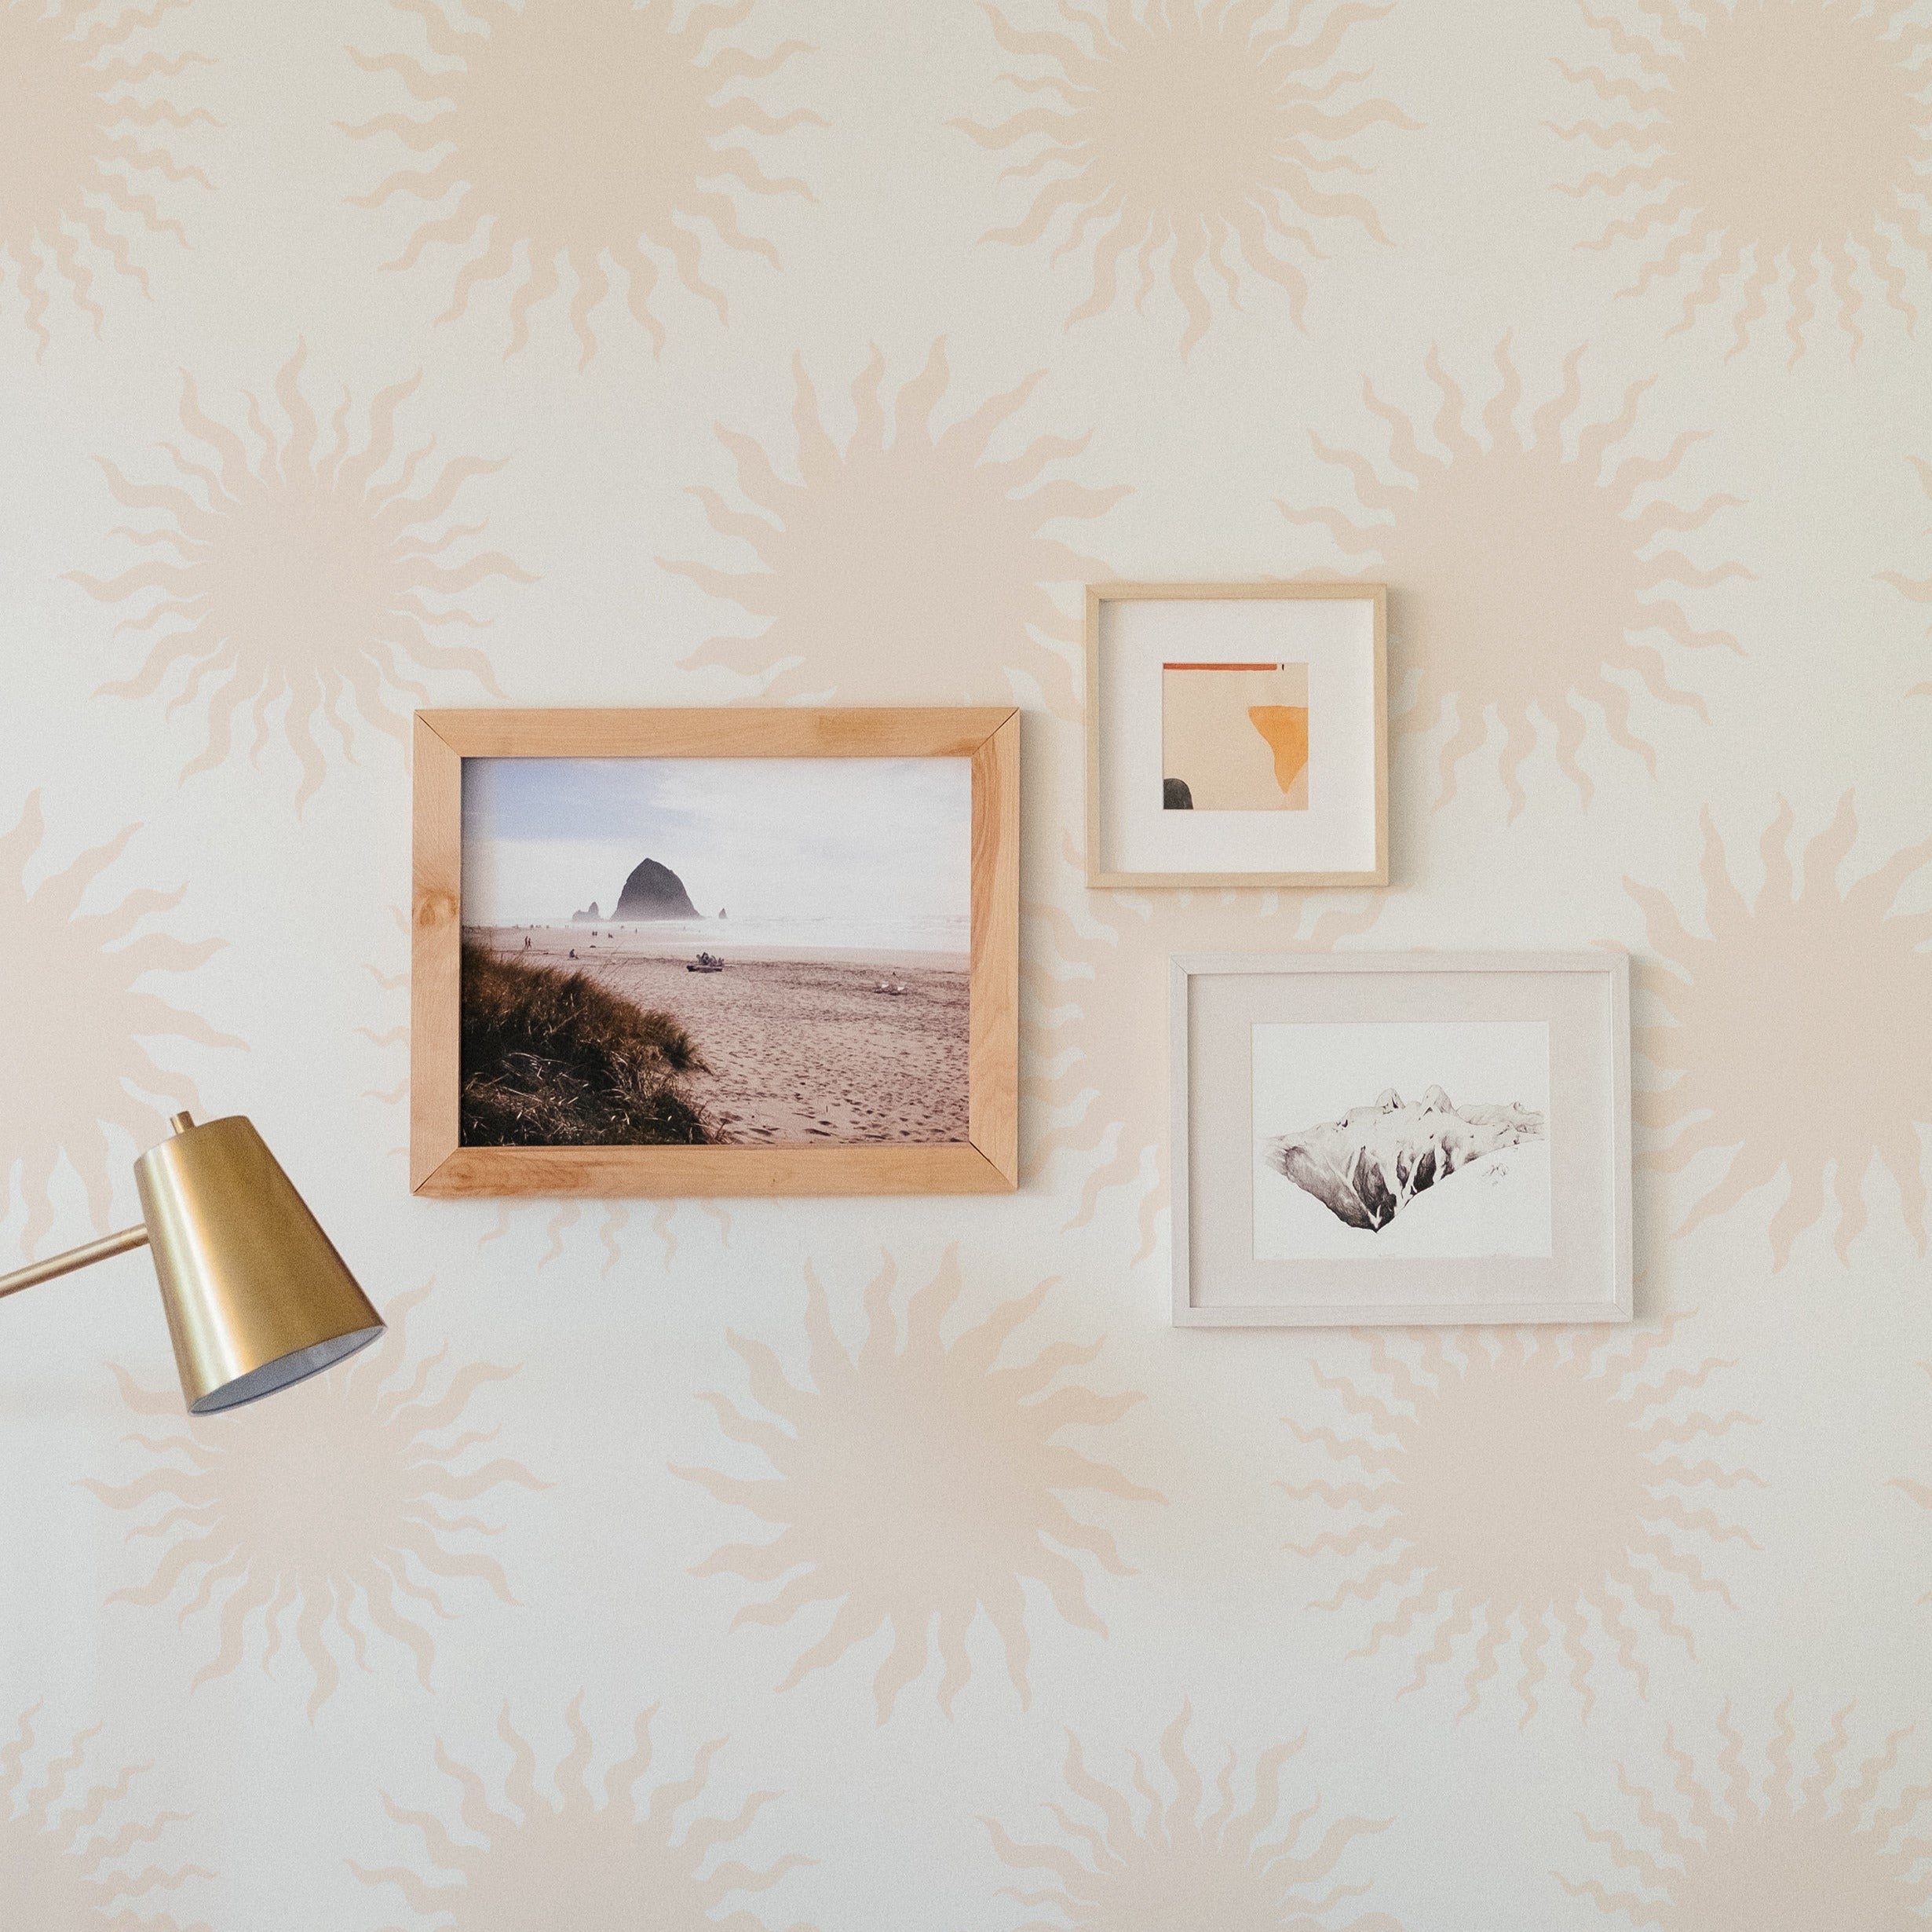 Wall decorated with Sunshine Tropical Dreams Wallpaper featuring subtle sunburst designs.